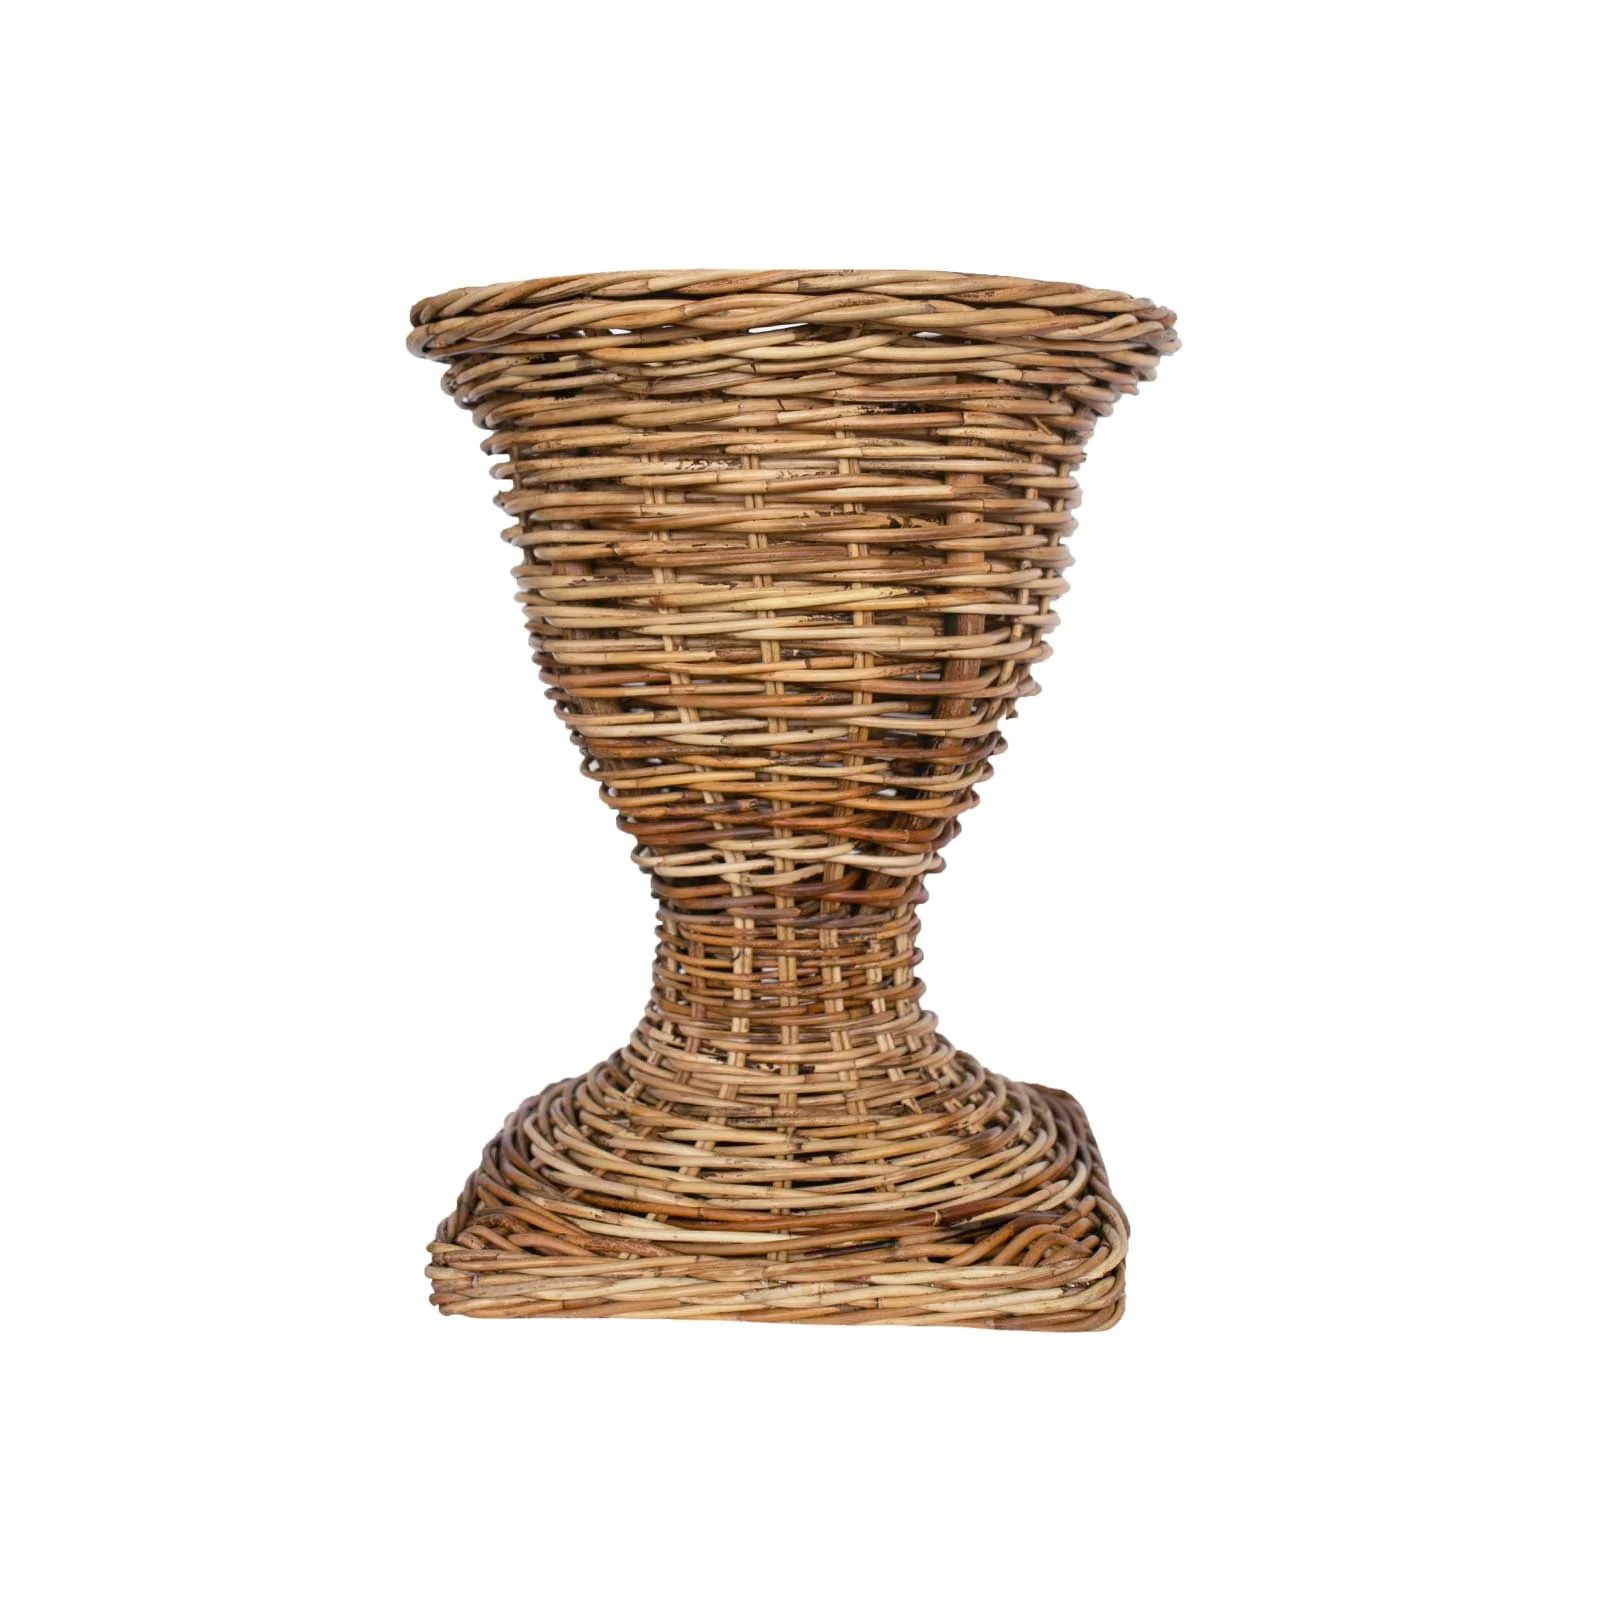 Woven Wicker Planter | Brooke and Lou